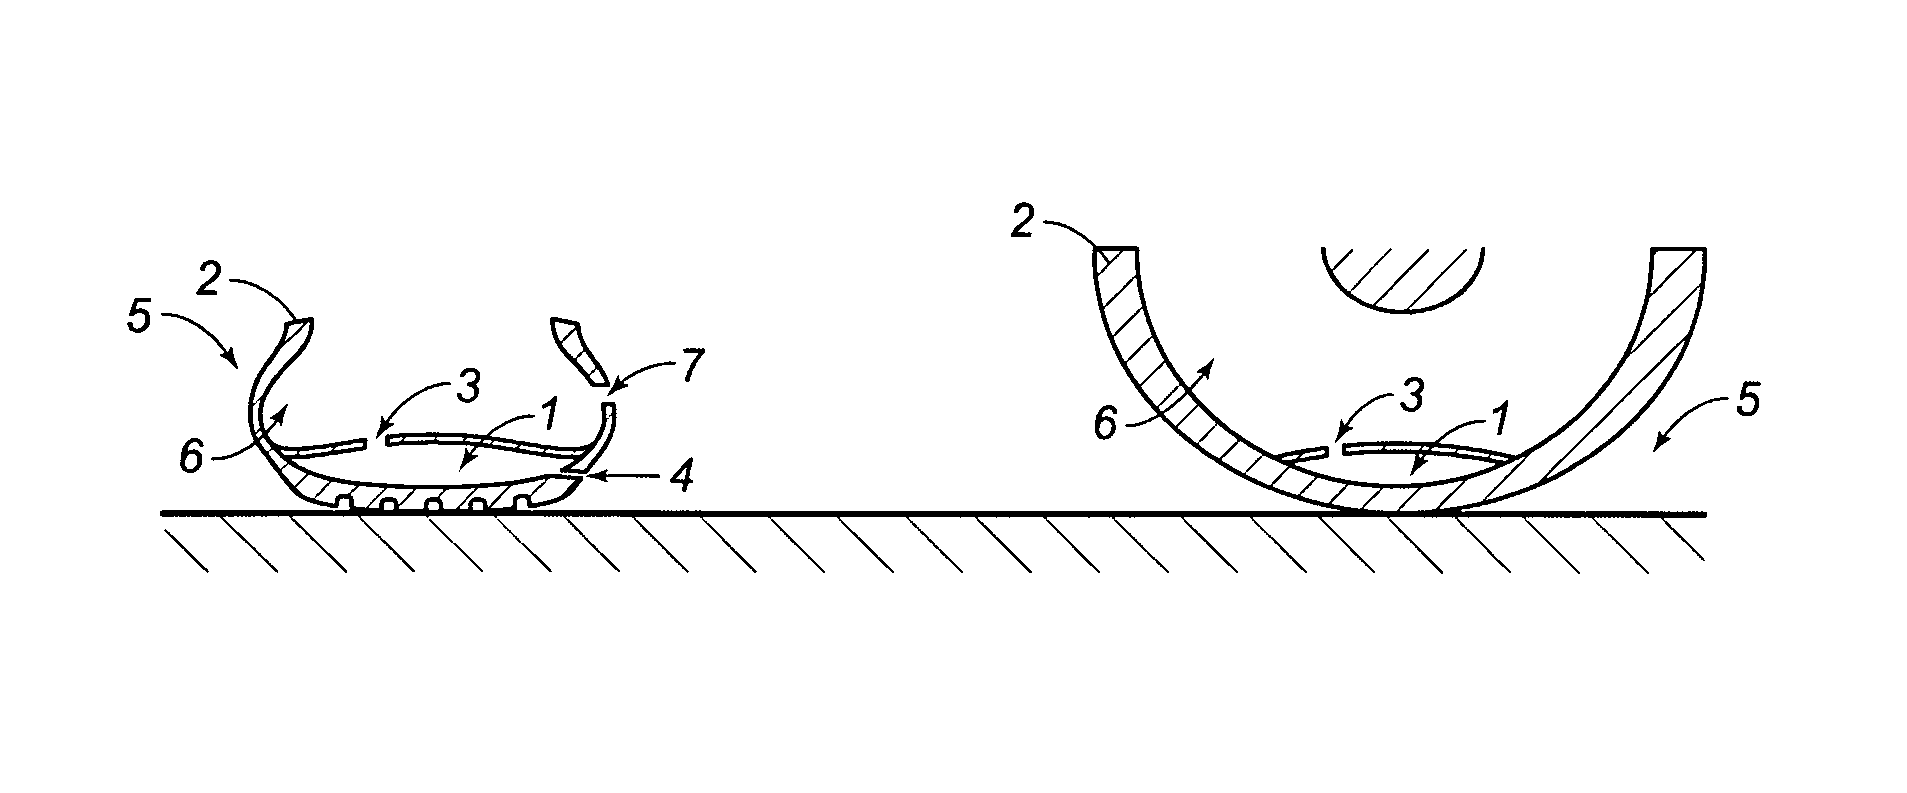 Device for monitoring maintenance and adjustment of pressure in a tire